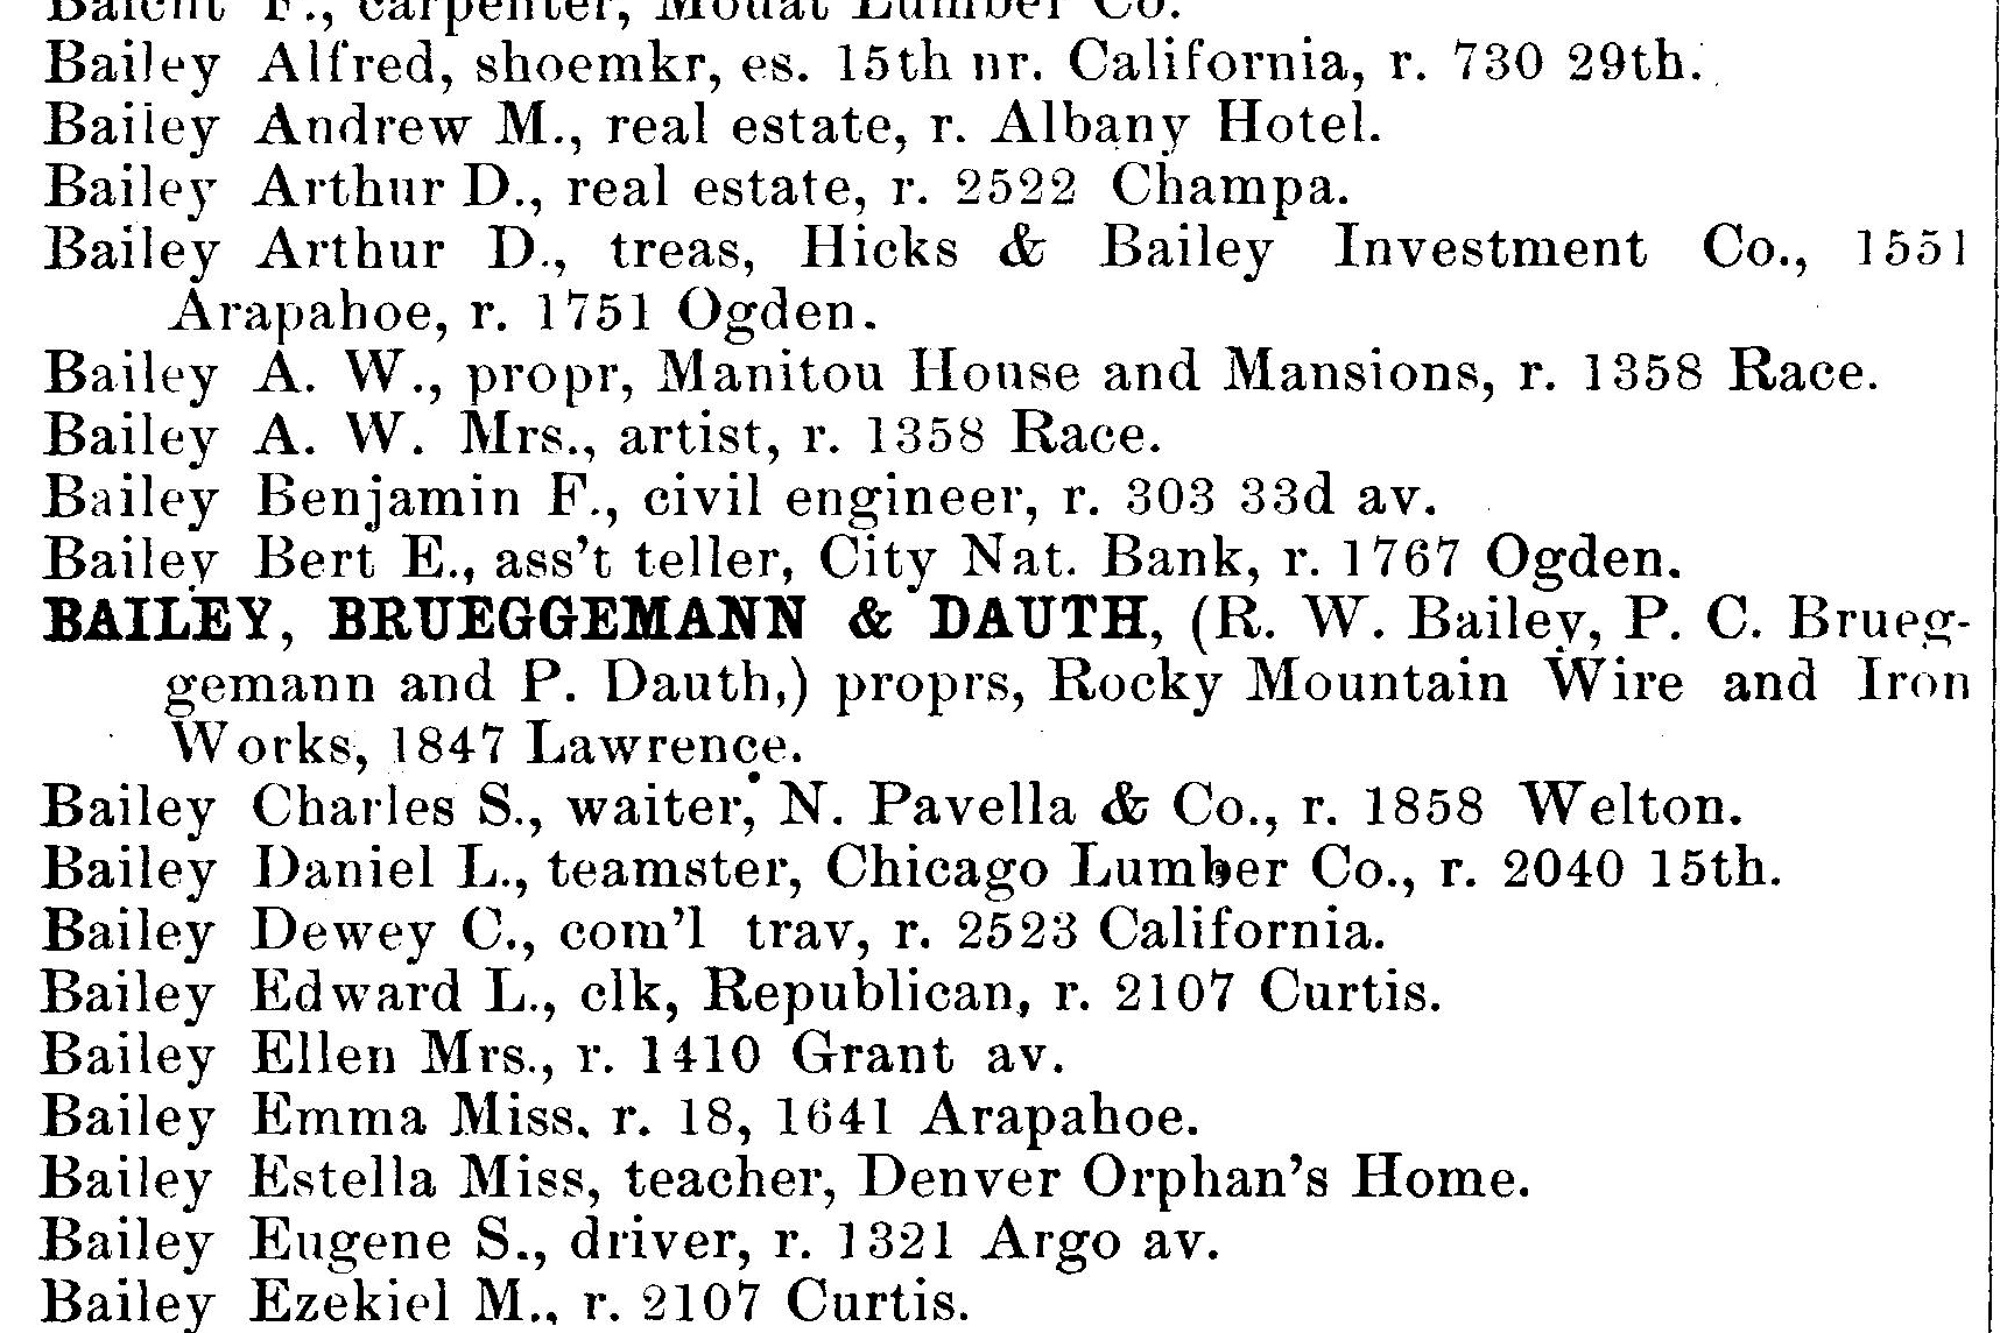 Dauth Family Archive - 1890 - Denver Directory - Entry For Brueggemann and Dauth